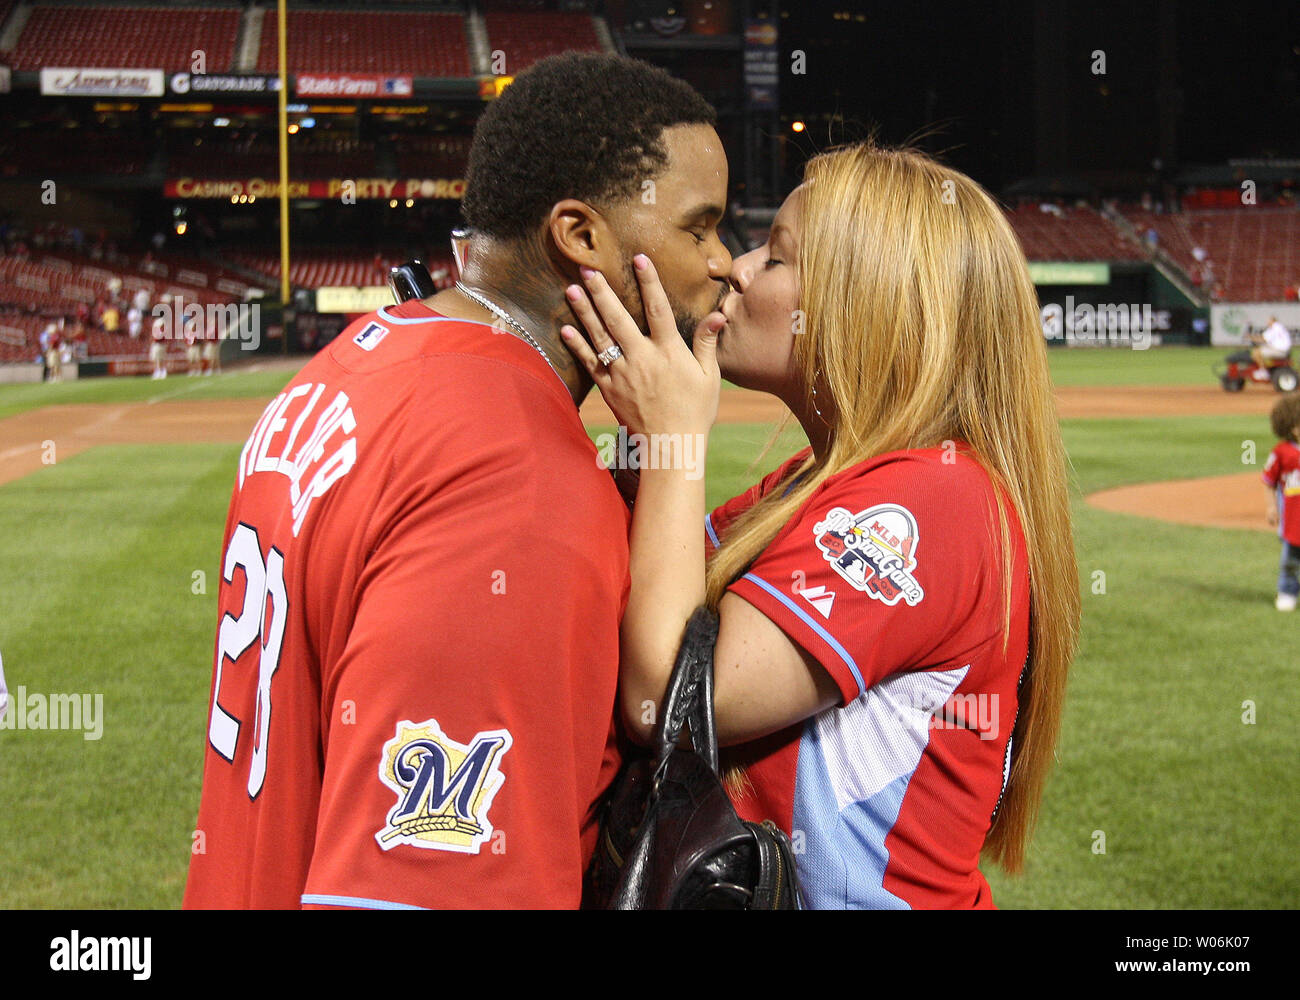 Milwaukee Brewers Prince Fielder receives a kiss from wife Chanel after  winning the Home Run Derby contest at Busch Stadium in St. Louis on July  13, 2009. Prince Fielder is the first